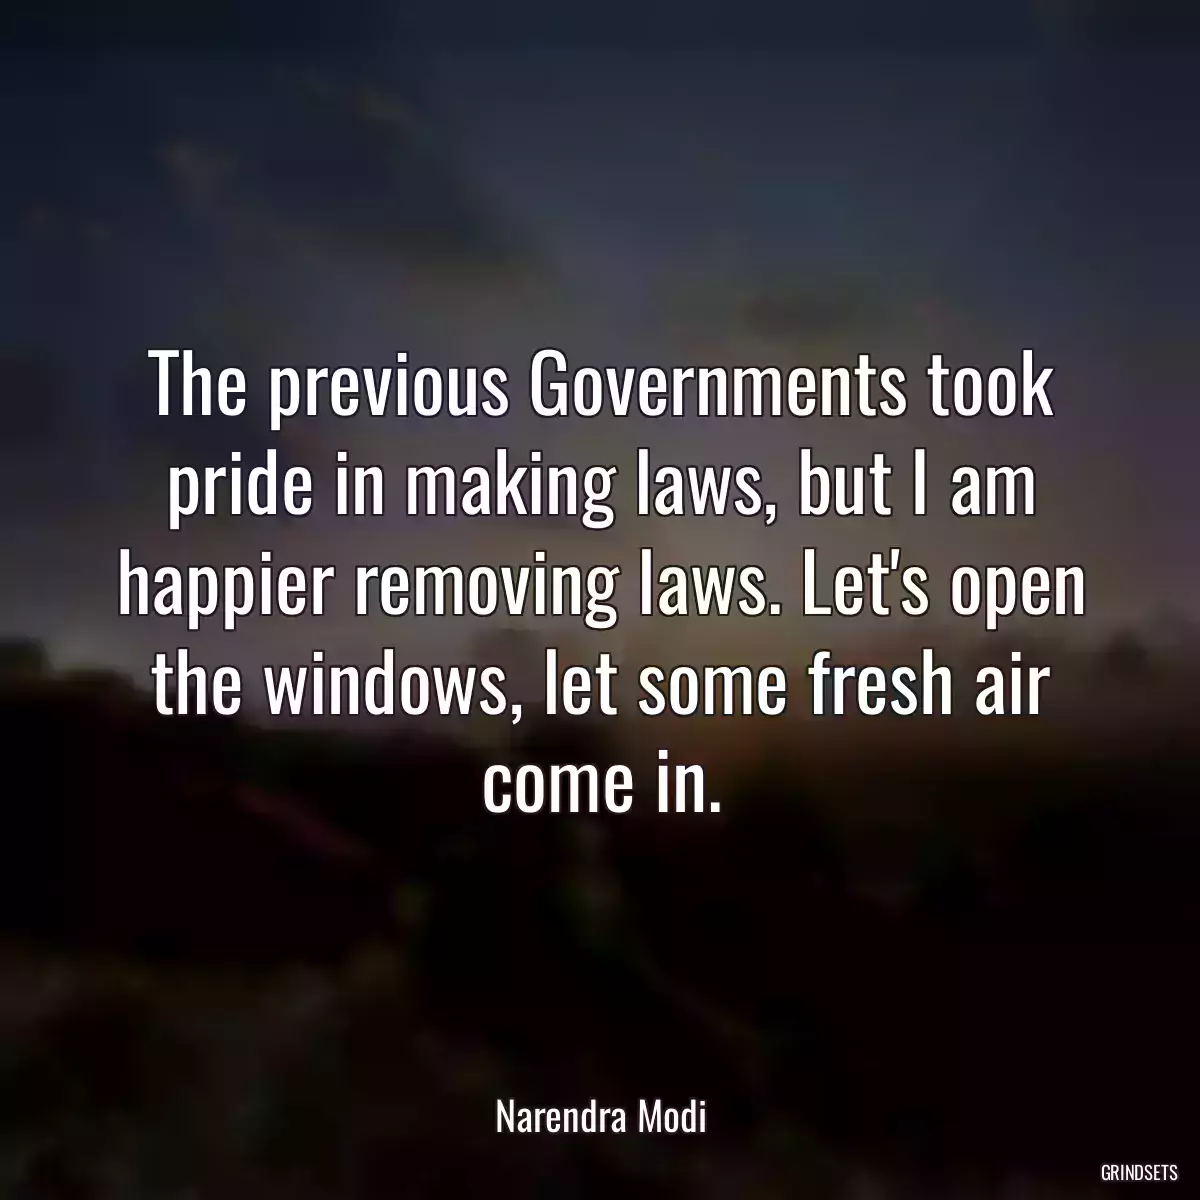 The previous Governments took pride in making laws, but I am happier removing laws. Let\'s open the windows, let some fresh air come in.